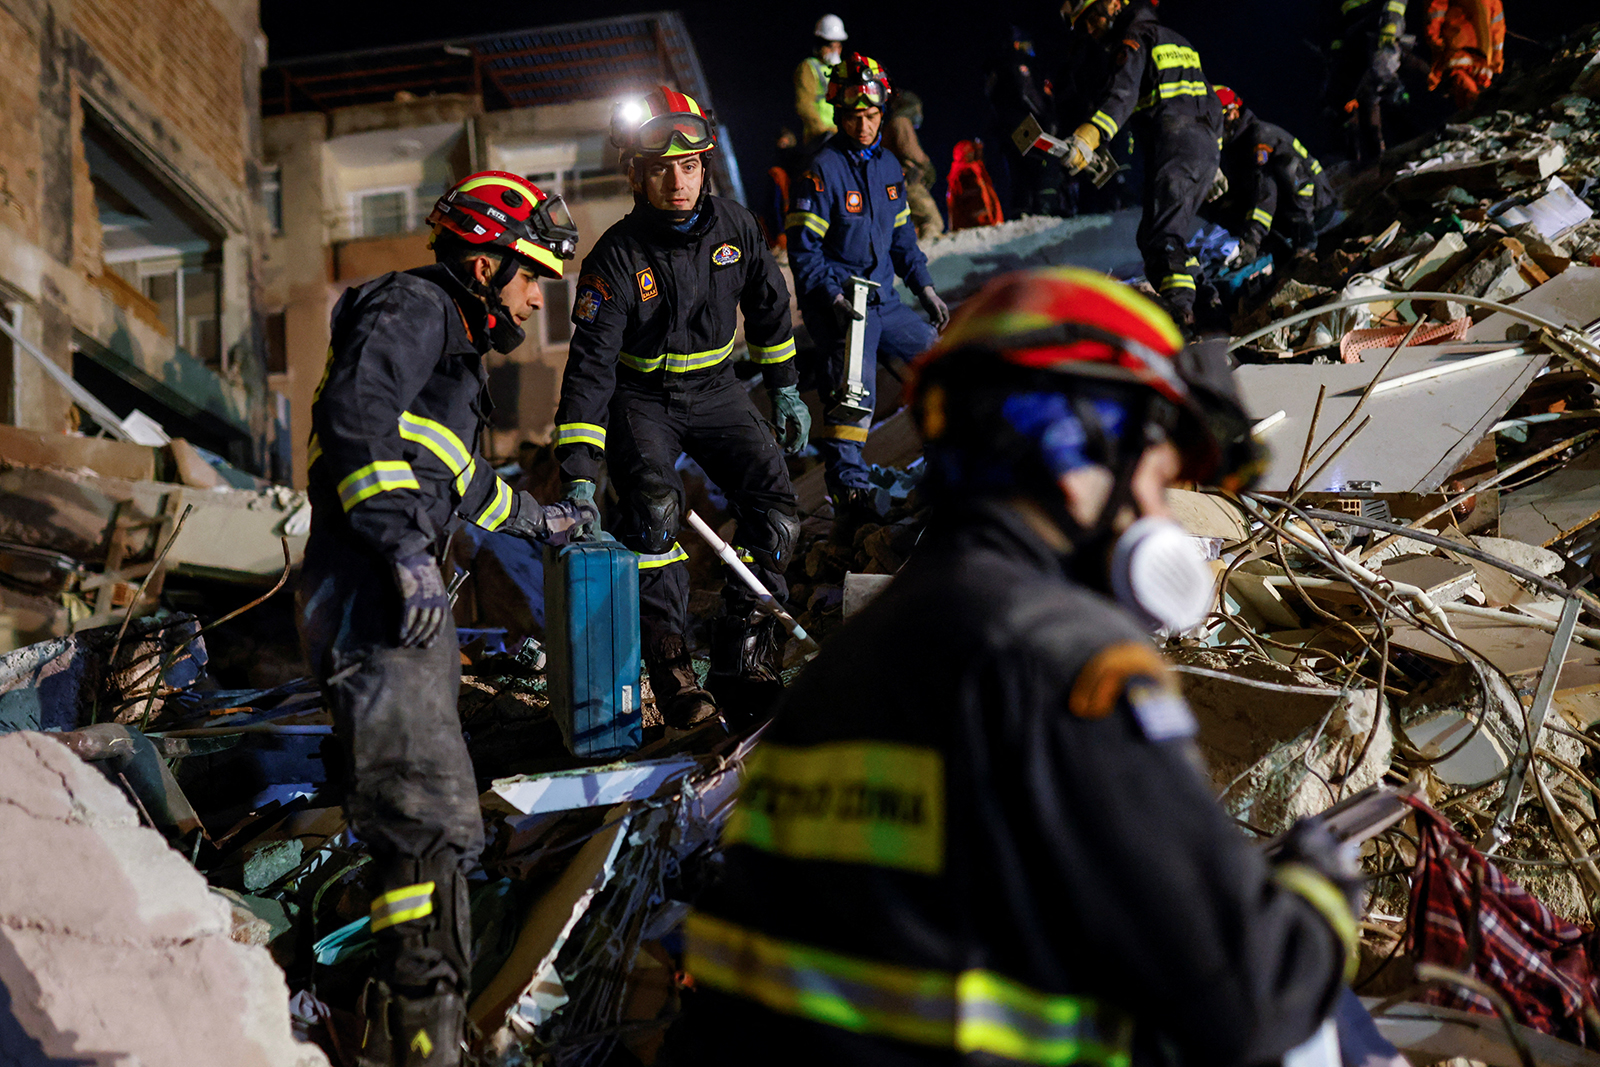 Members of a rescue team work on the site of a collapsed building, as the search for survivors continues in Hatay, Turkey on February 11.